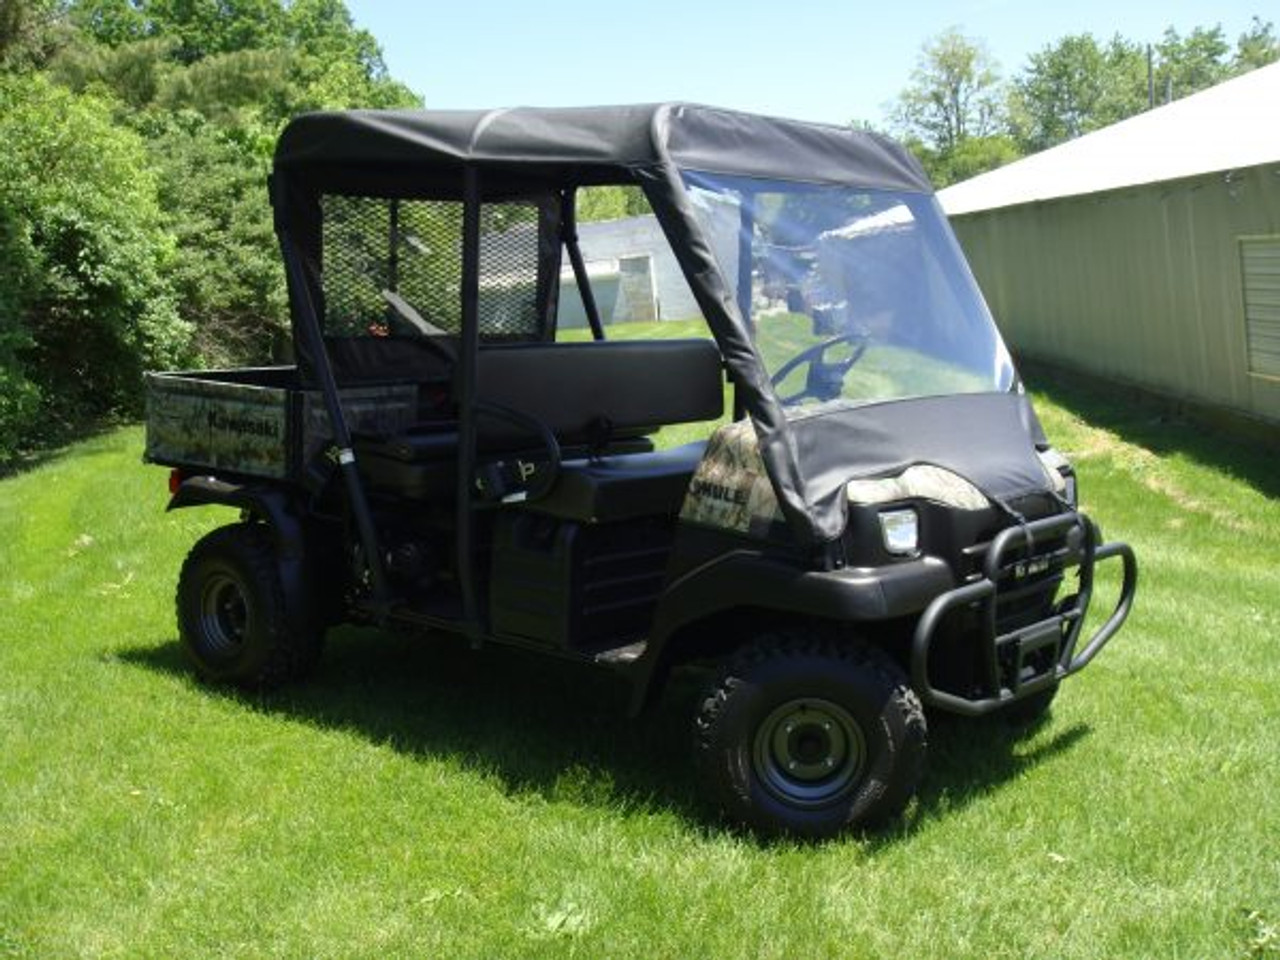 3 Star side x side Kawasaki Mule 3000/3010 Trans vinyl windshield and top front and side angle view